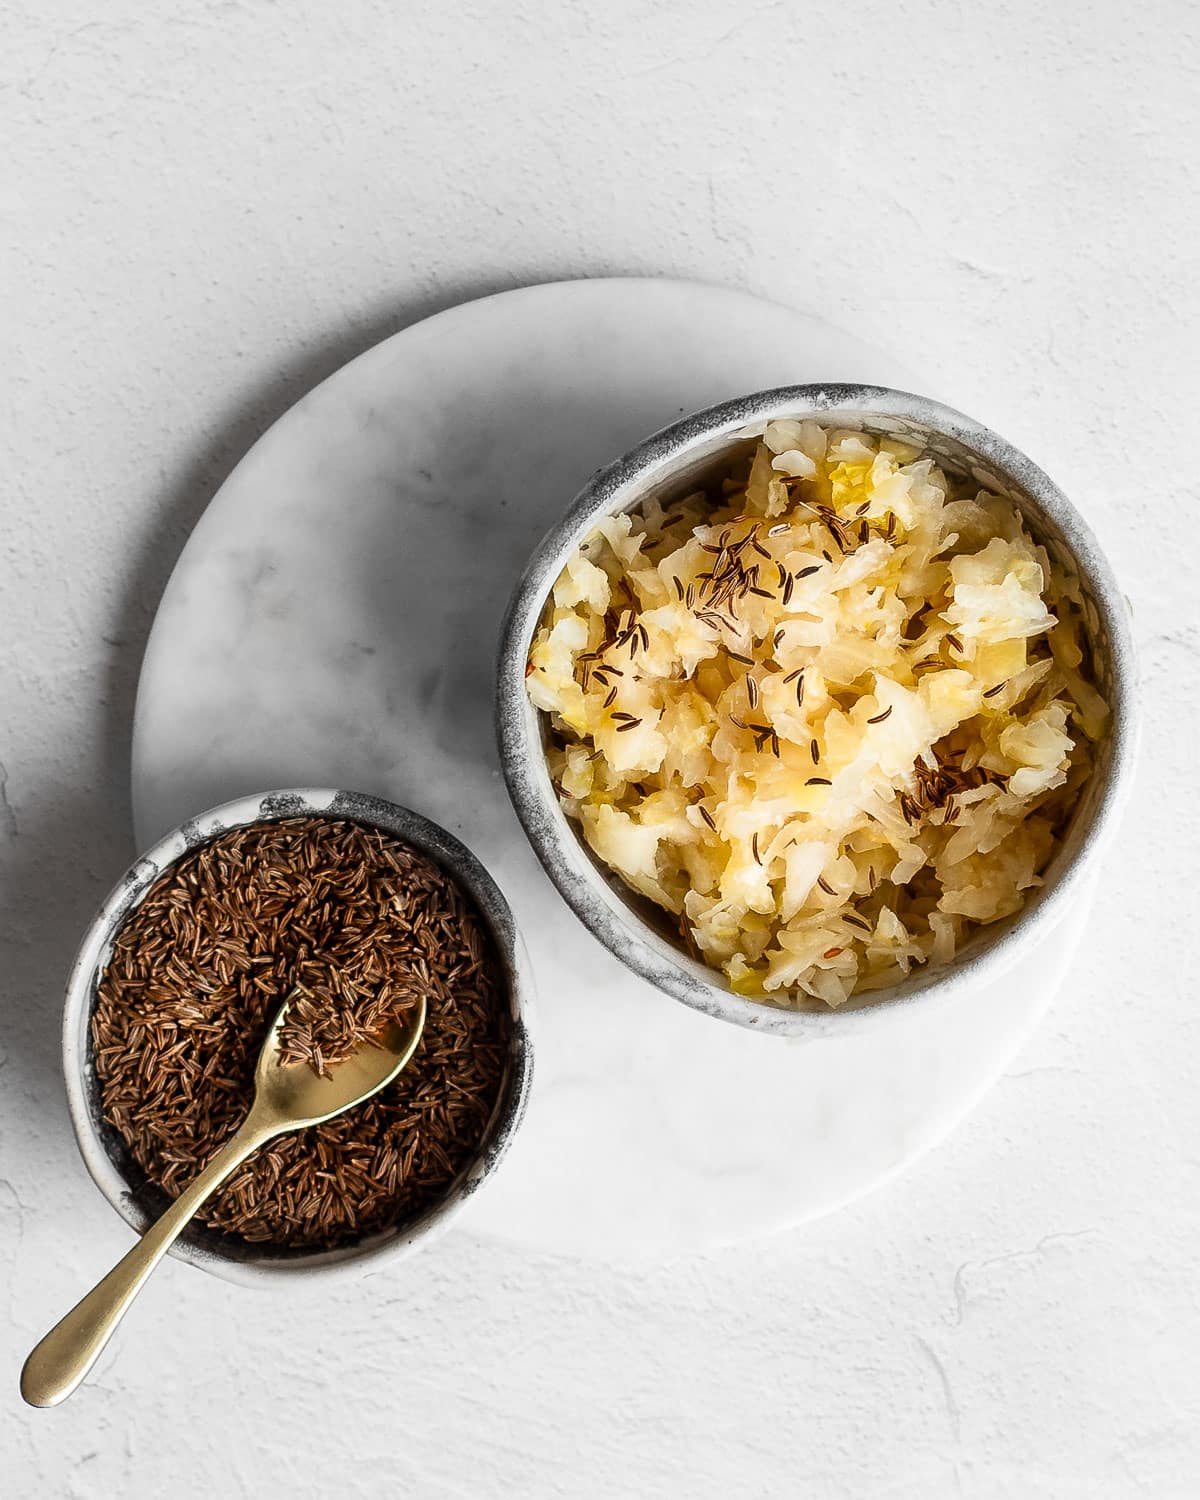 Caraway sauerkraut in a stoneware bowl on a marble surface next to a bowl of caraway seeds